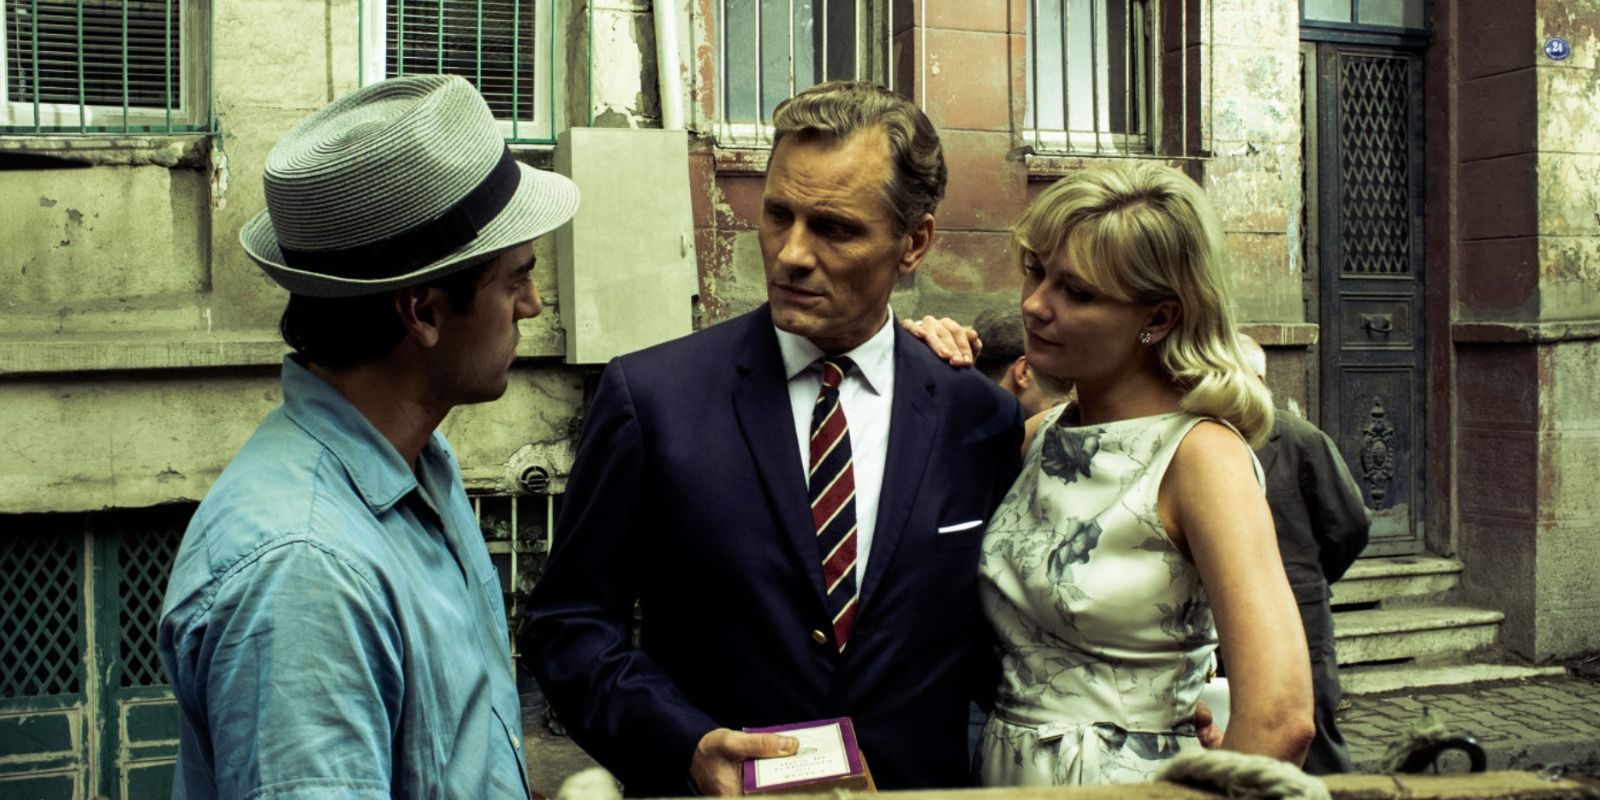 Oscar Isaac, Viggo Mortensen, and Kirsten Dunst talking in the street in Two Faces of January 